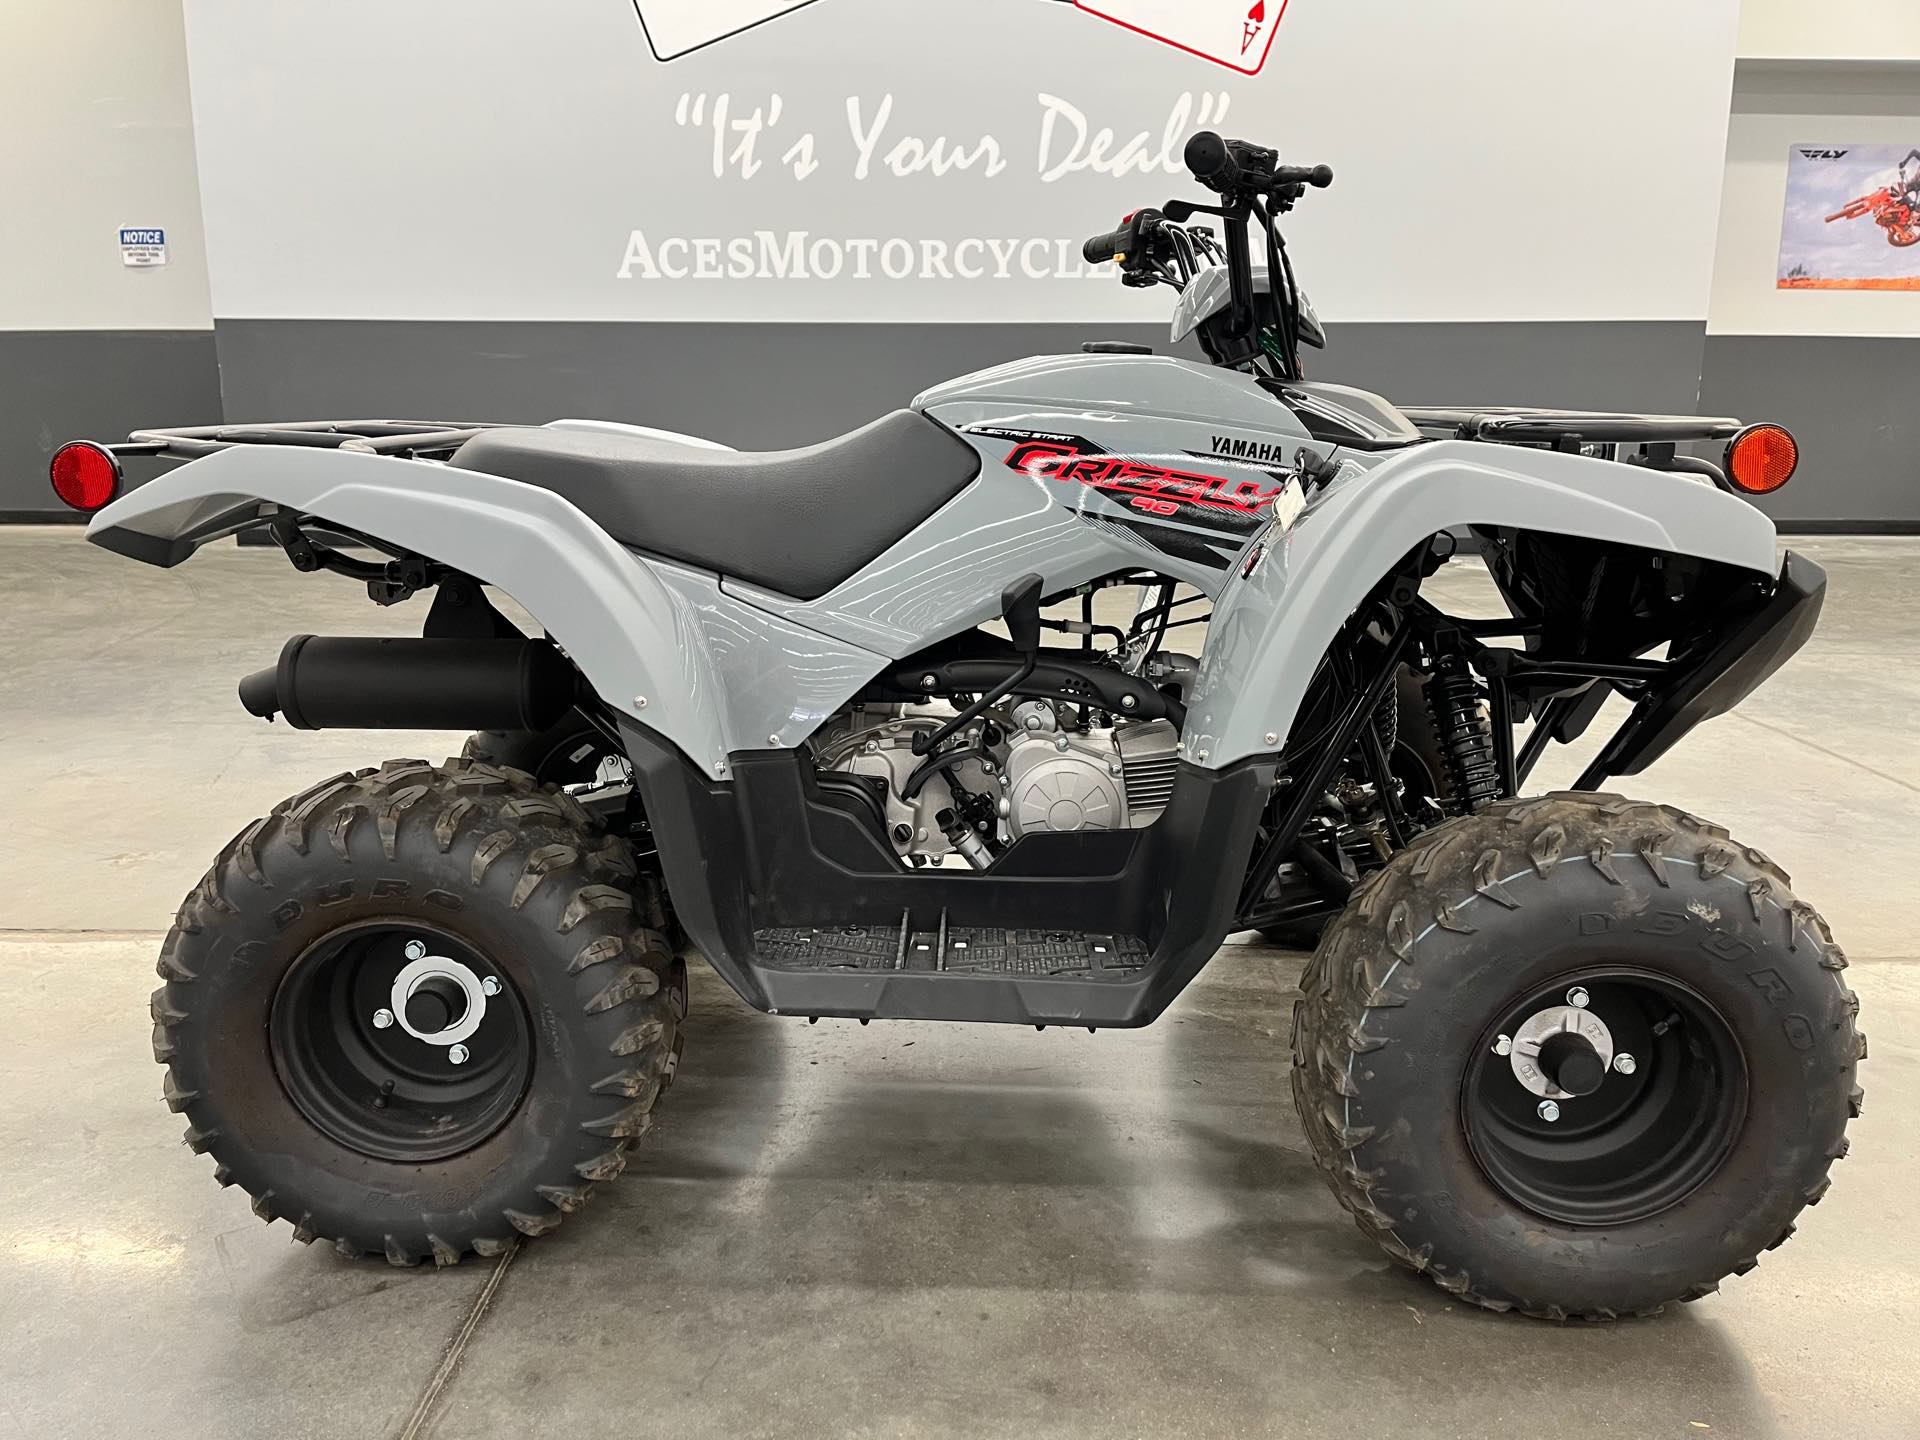 2021 Yamaha Grizzly 90 at Aces Motorcycles - Denver